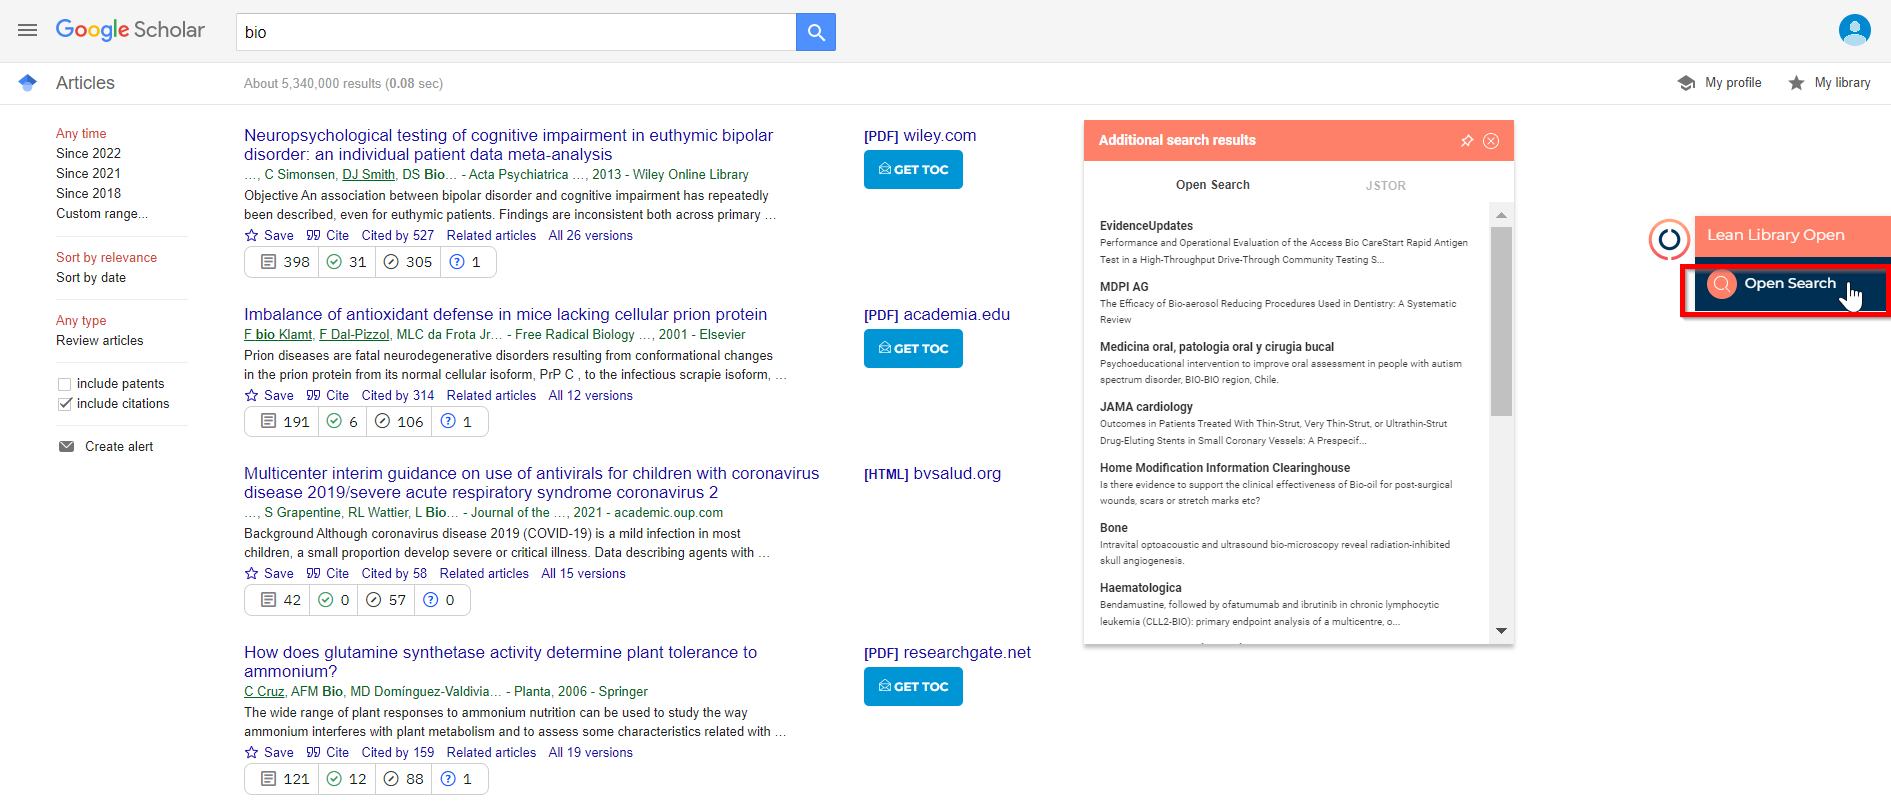 An example of Open Search whilst on Google Scholar